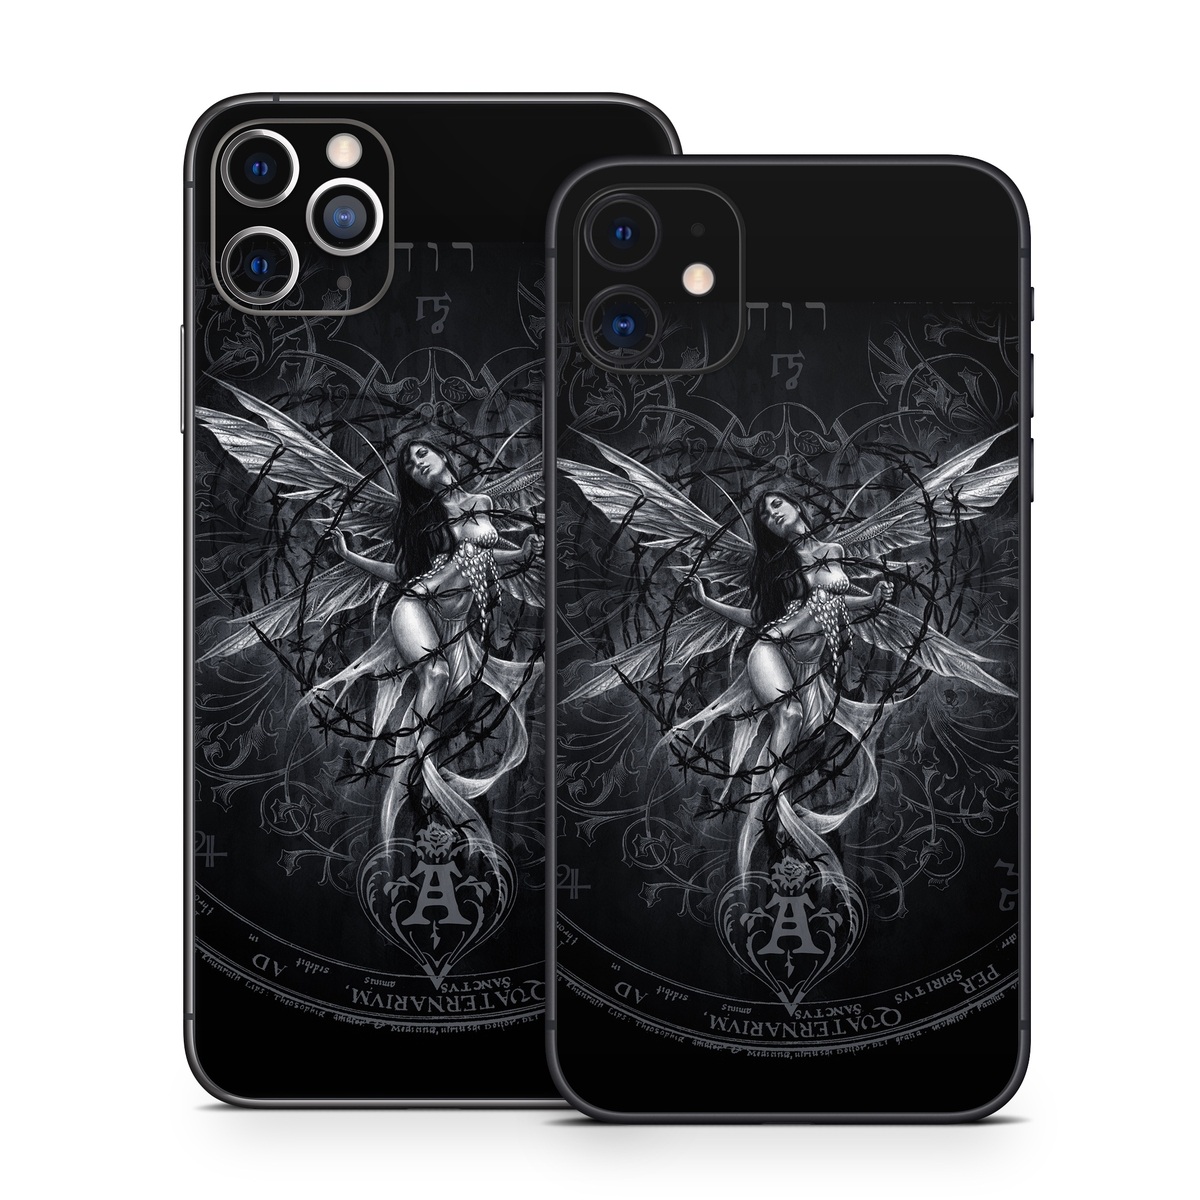 iPhone 11 Series Skin design of Illustration, Graphic design, Darkness, Fictional character, Black-and-white, Pattern, Graphics, Mythical creature, Circle, Wing, with black, white colors